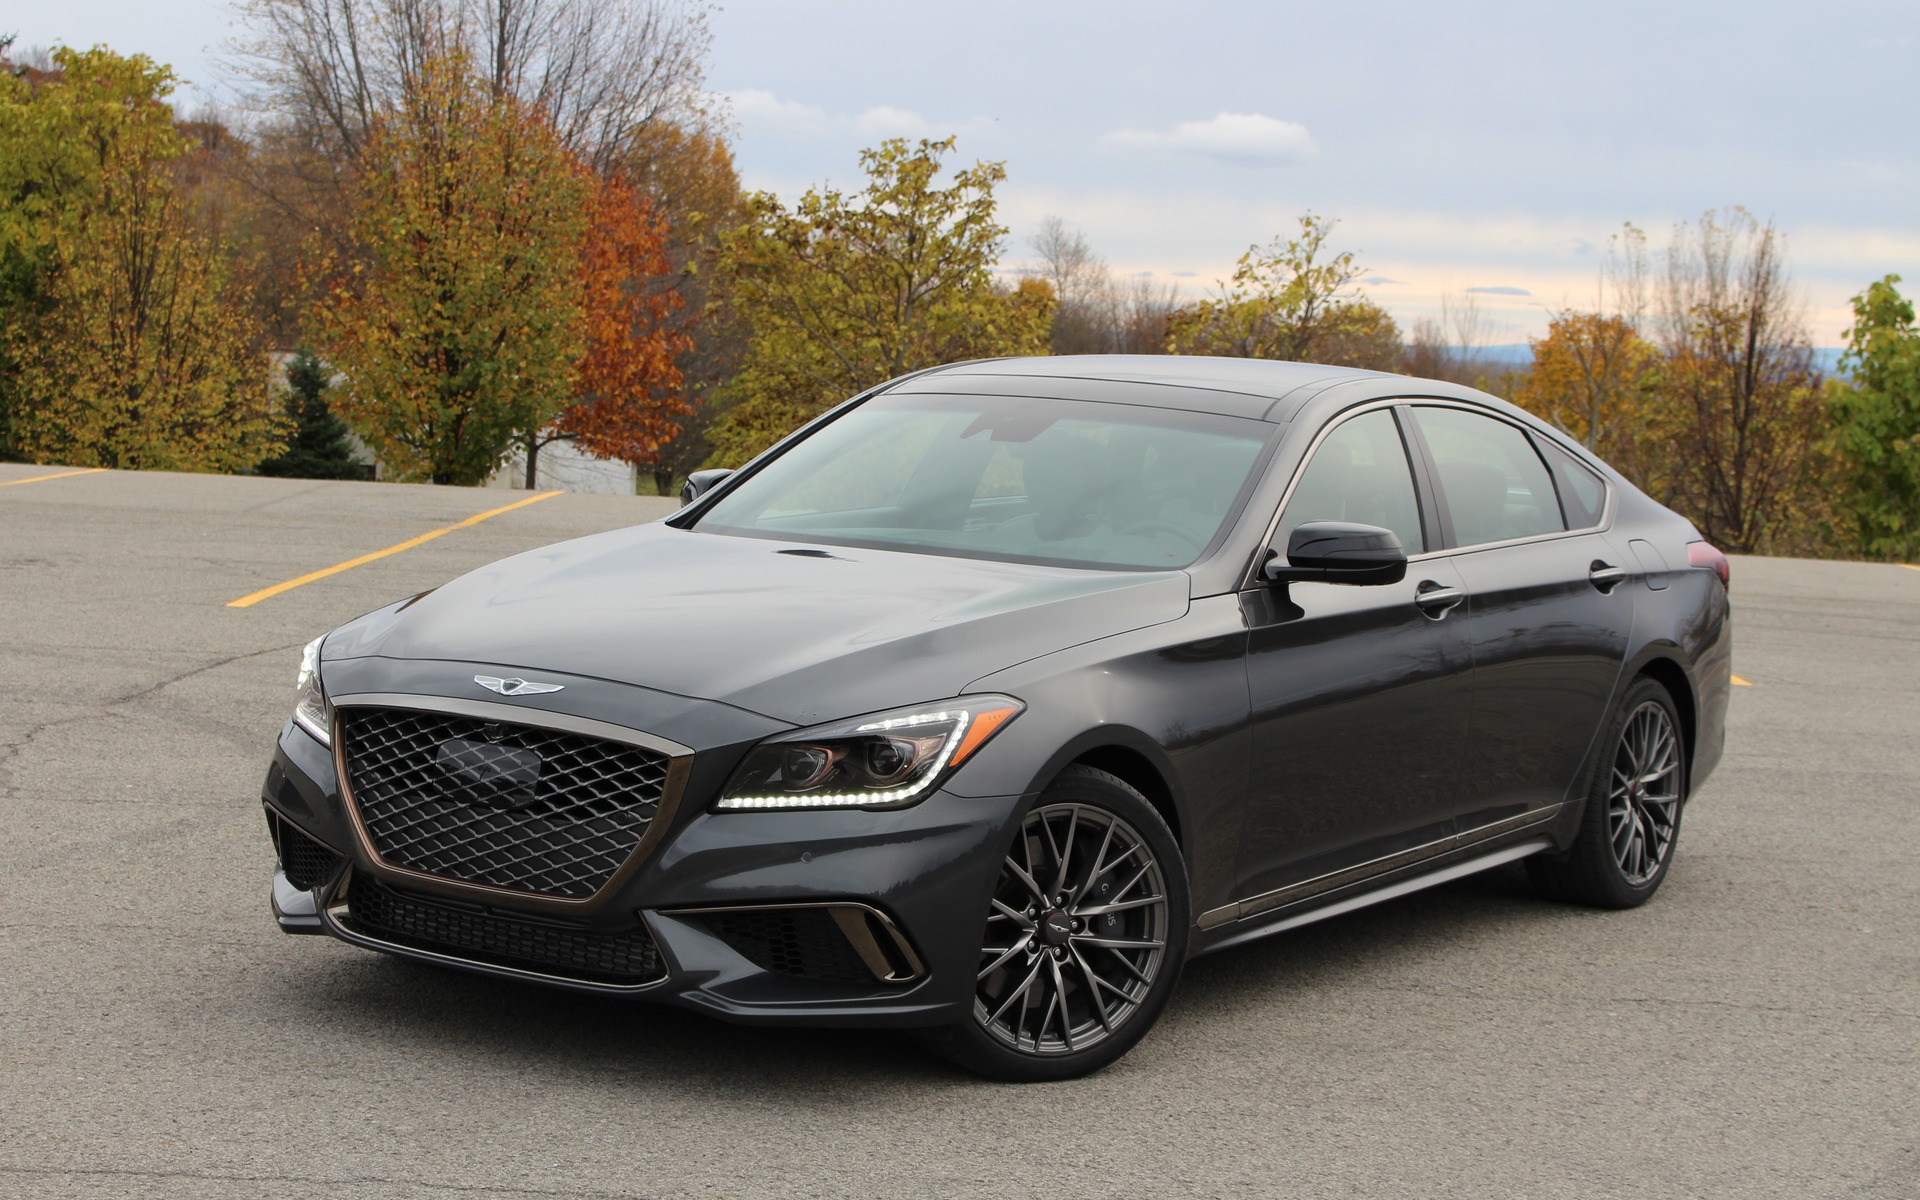 2018 Genesis G80: the Luxury Without the Prestige - The Car Guide